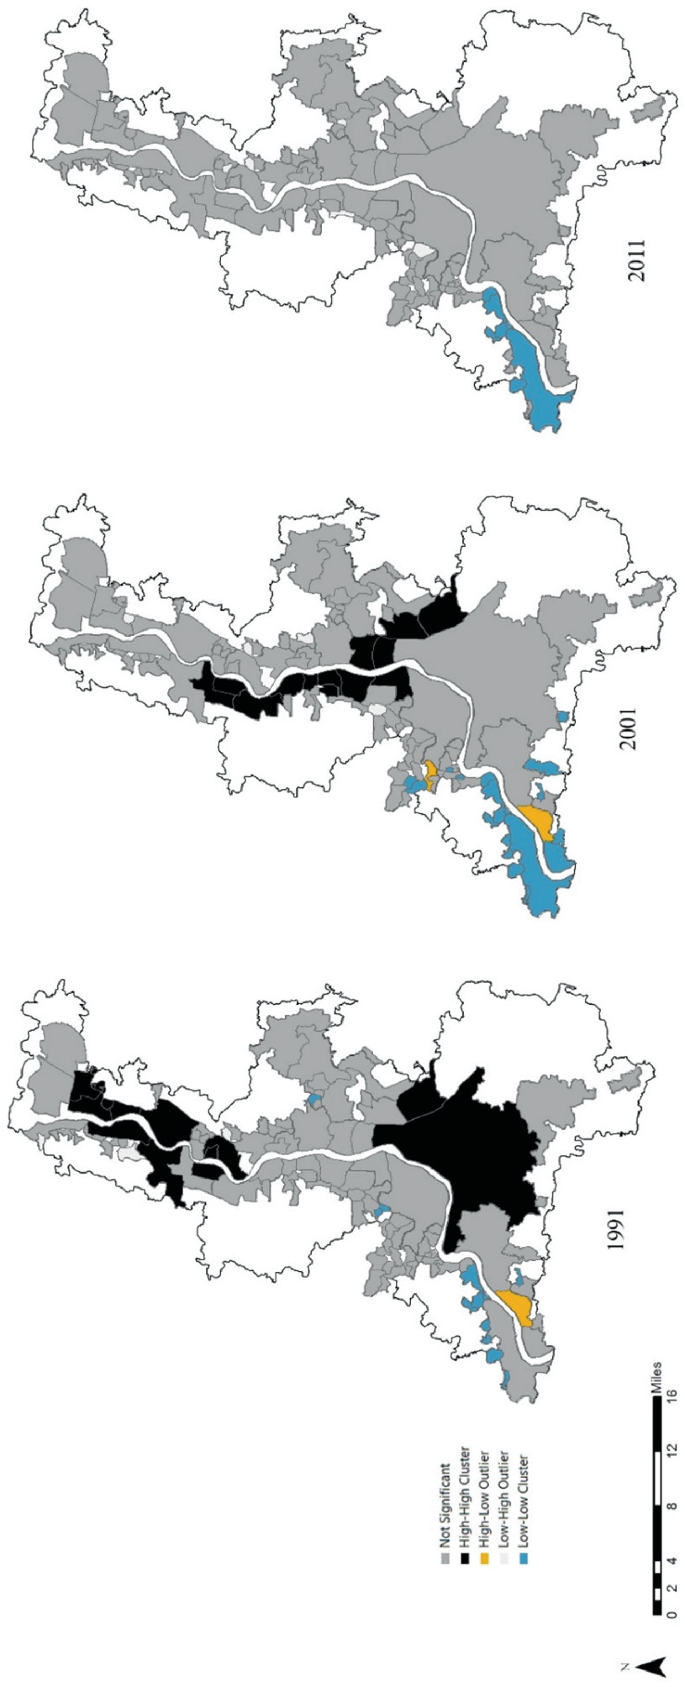 3 maps of Kolkata Urban Agglomeration present the distribution of results for L I S A for the years 1991, 2001, and, 2011. A high-to-high cluster is observed at the core and in the outer periphery in 1991 and in the inner periphery in 2001. No high-to-high cluster is observed in 2011.